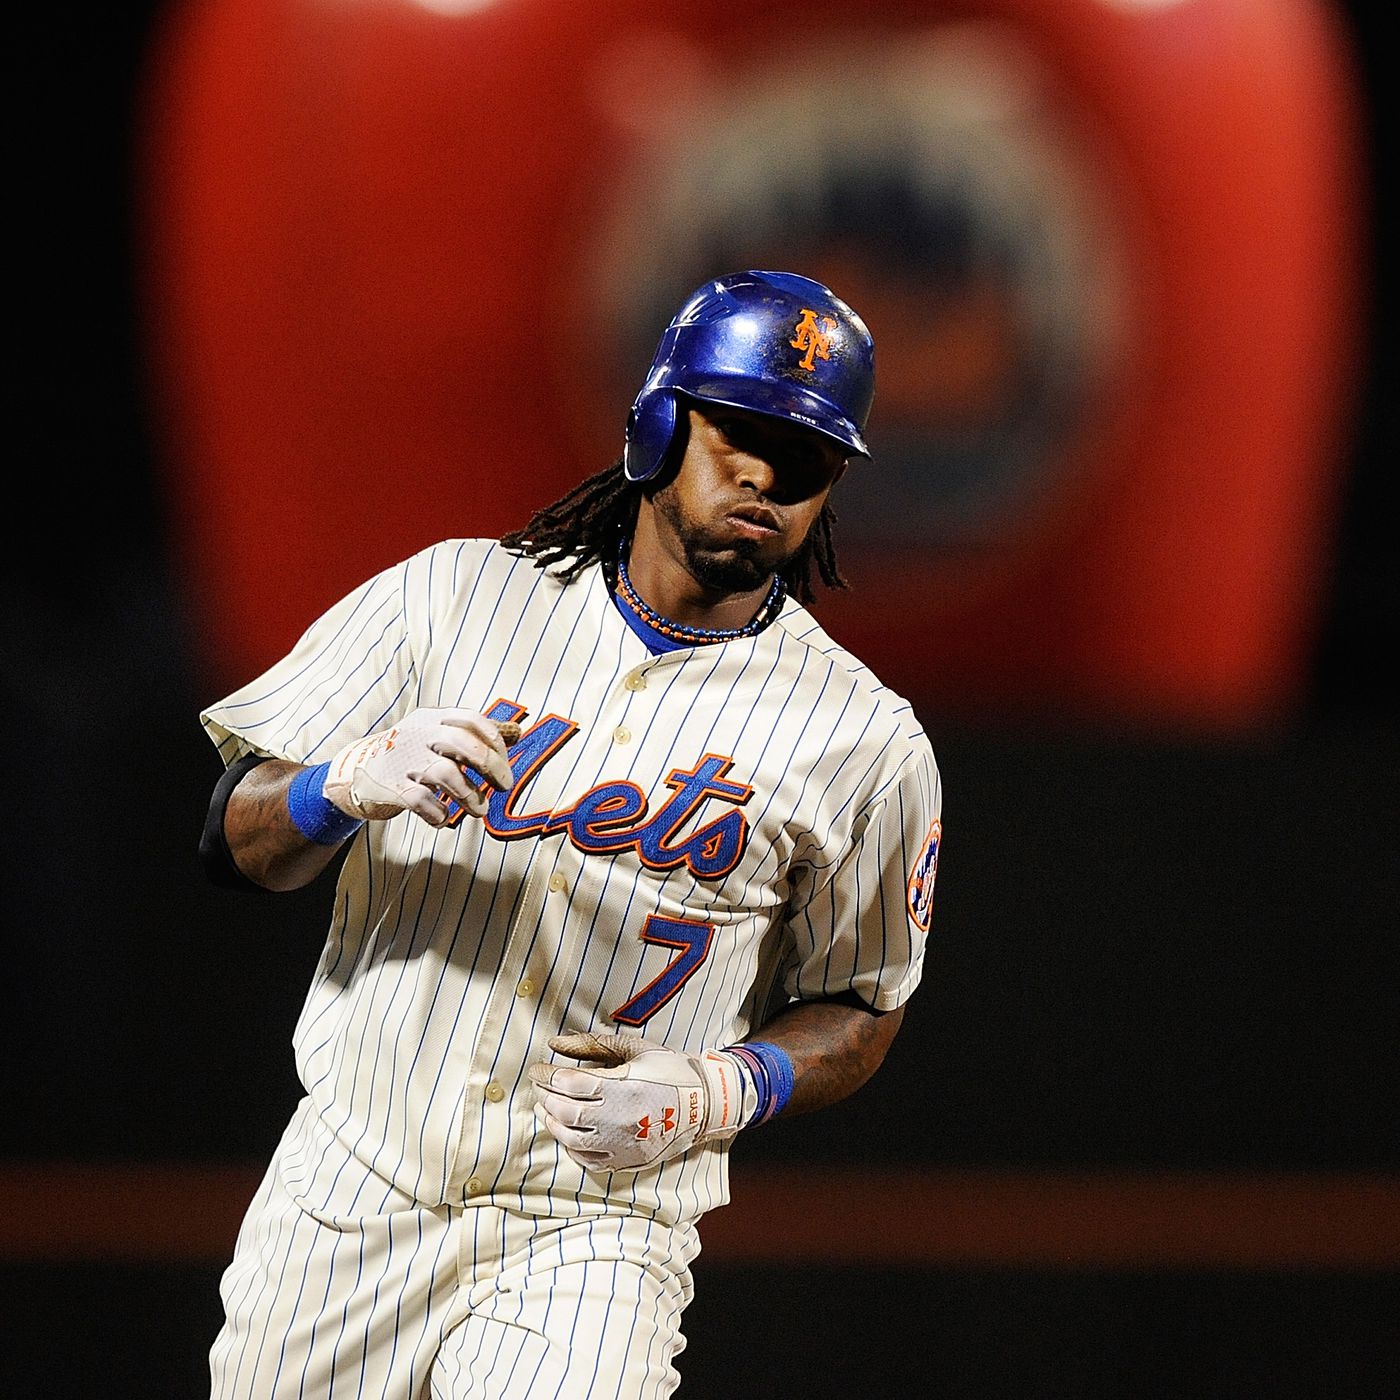 The Mets shouldn't bring Jose Reyes back to Flushing' Avenue